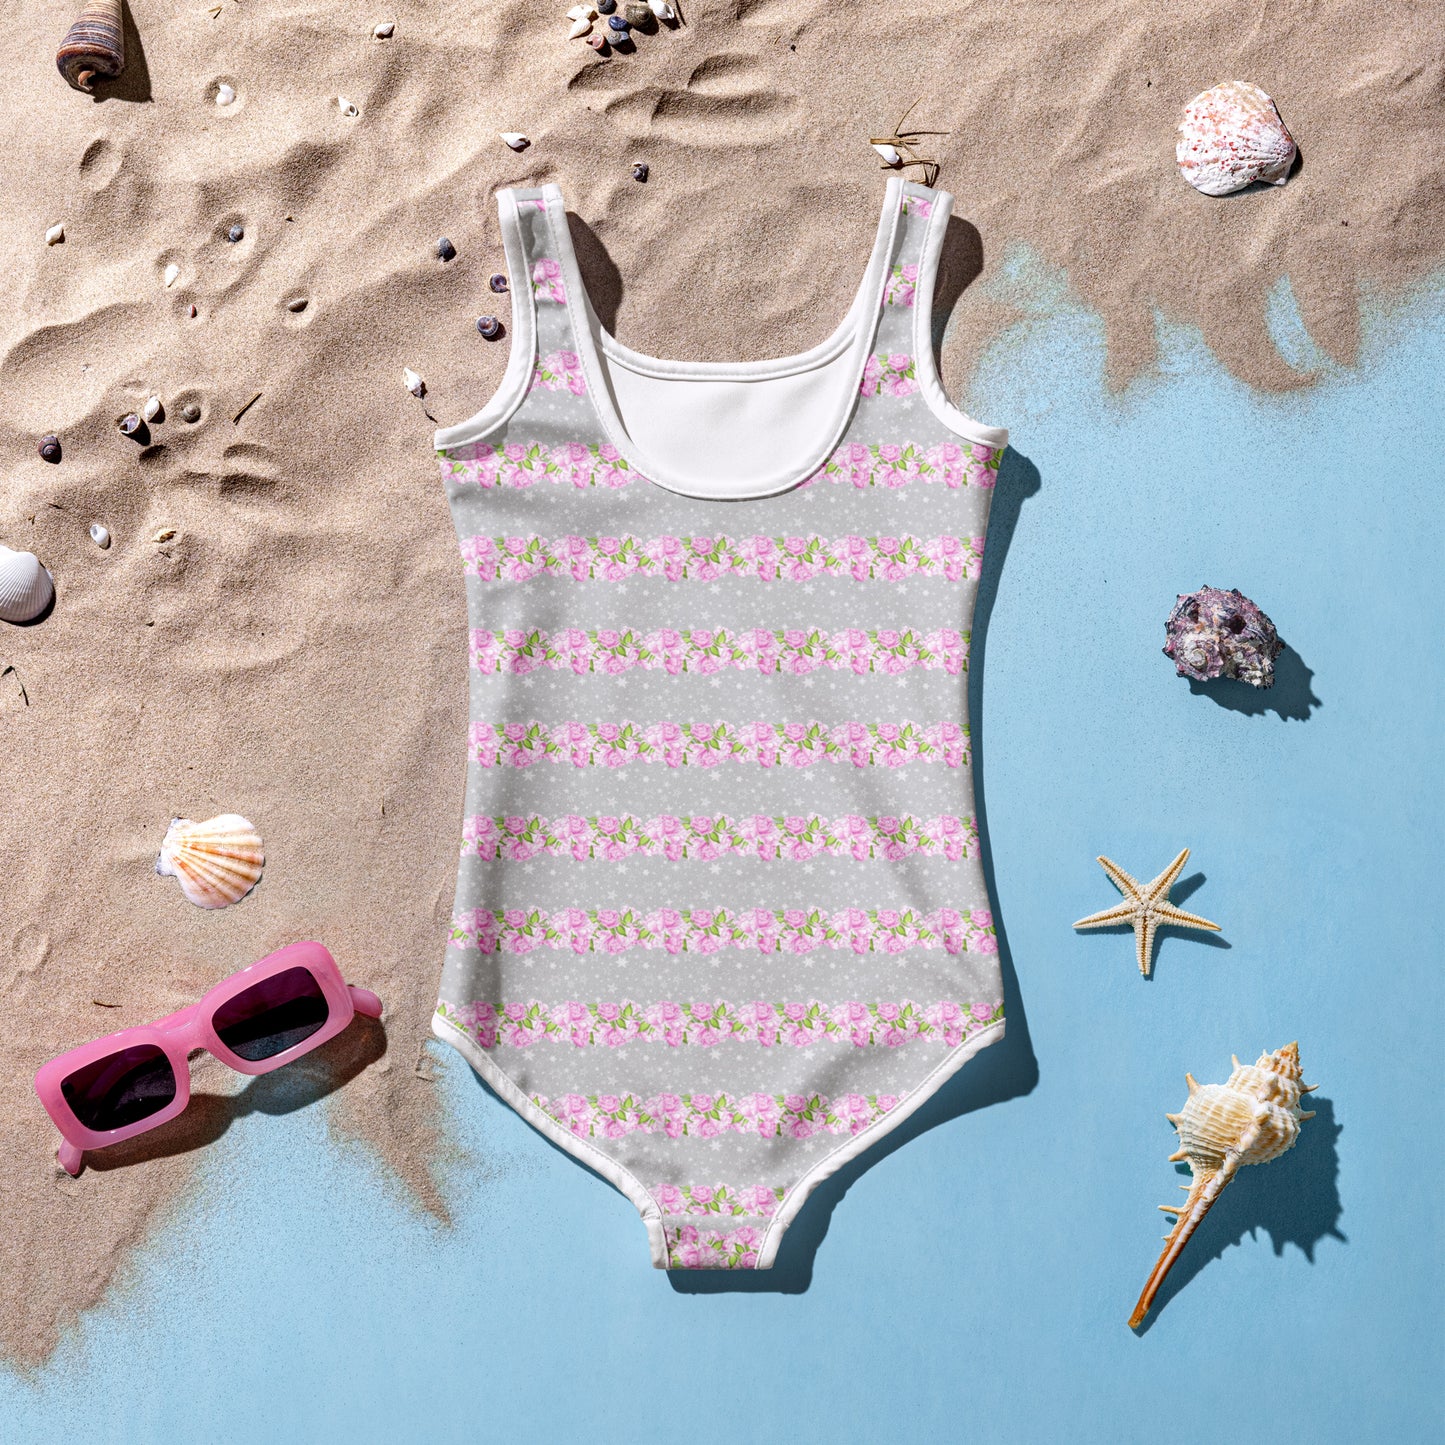 Rows of Pink Roses - Kids Swimsuit